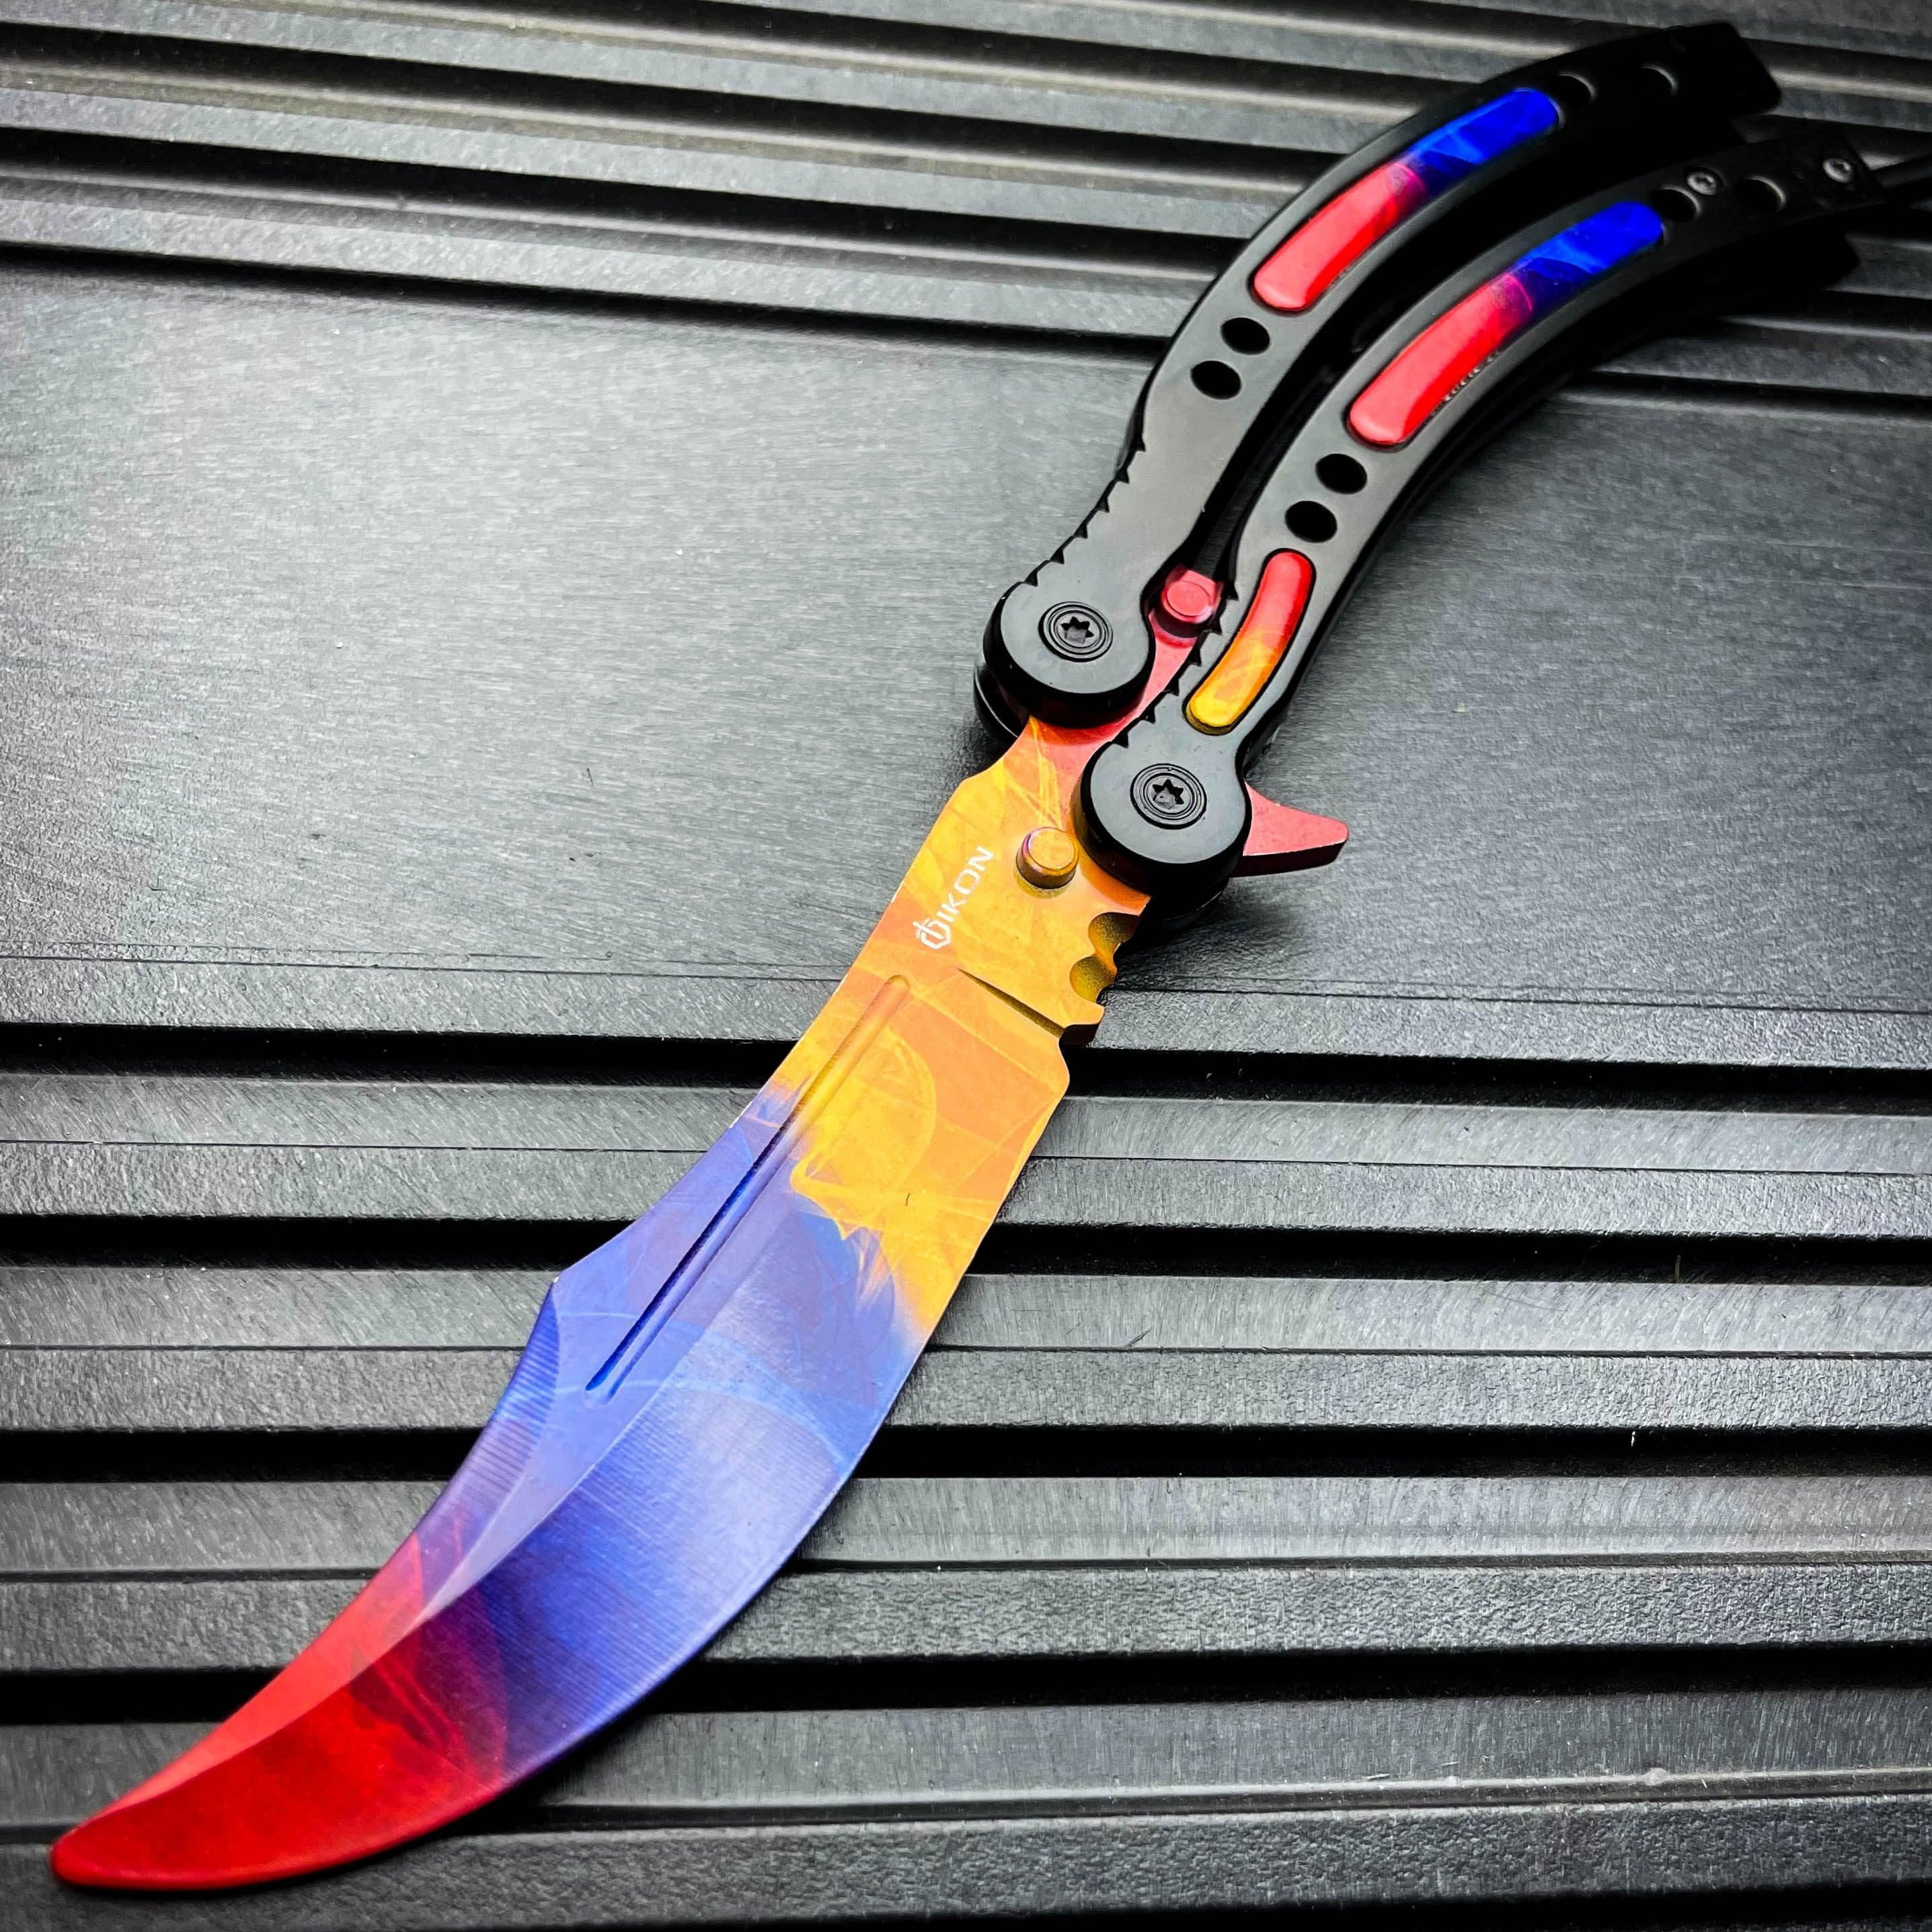 ☆ Butterfly Knife Marble Fade